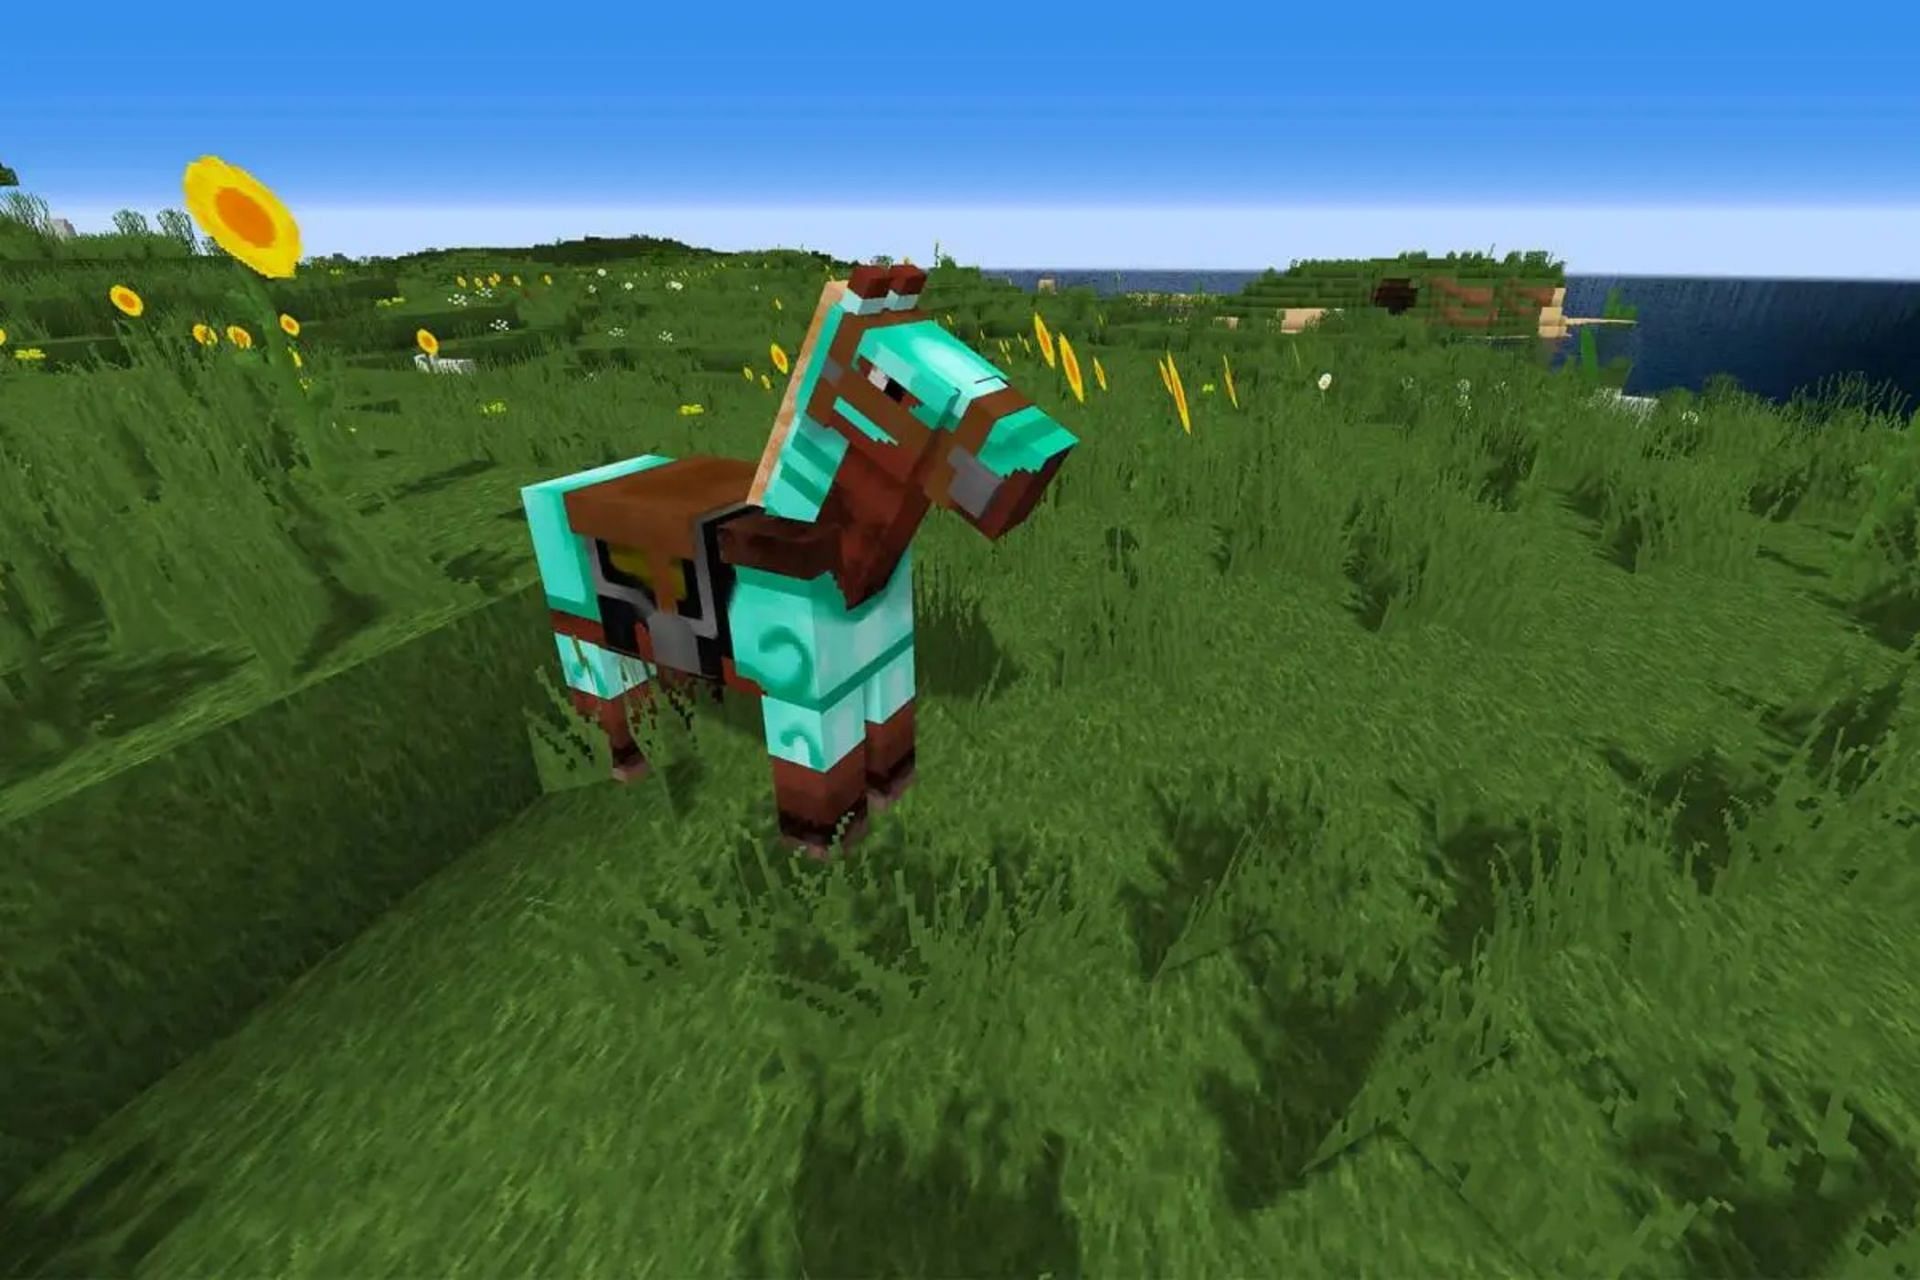 Horses can equip armor to improve their durability in battle (Image via Mojang)